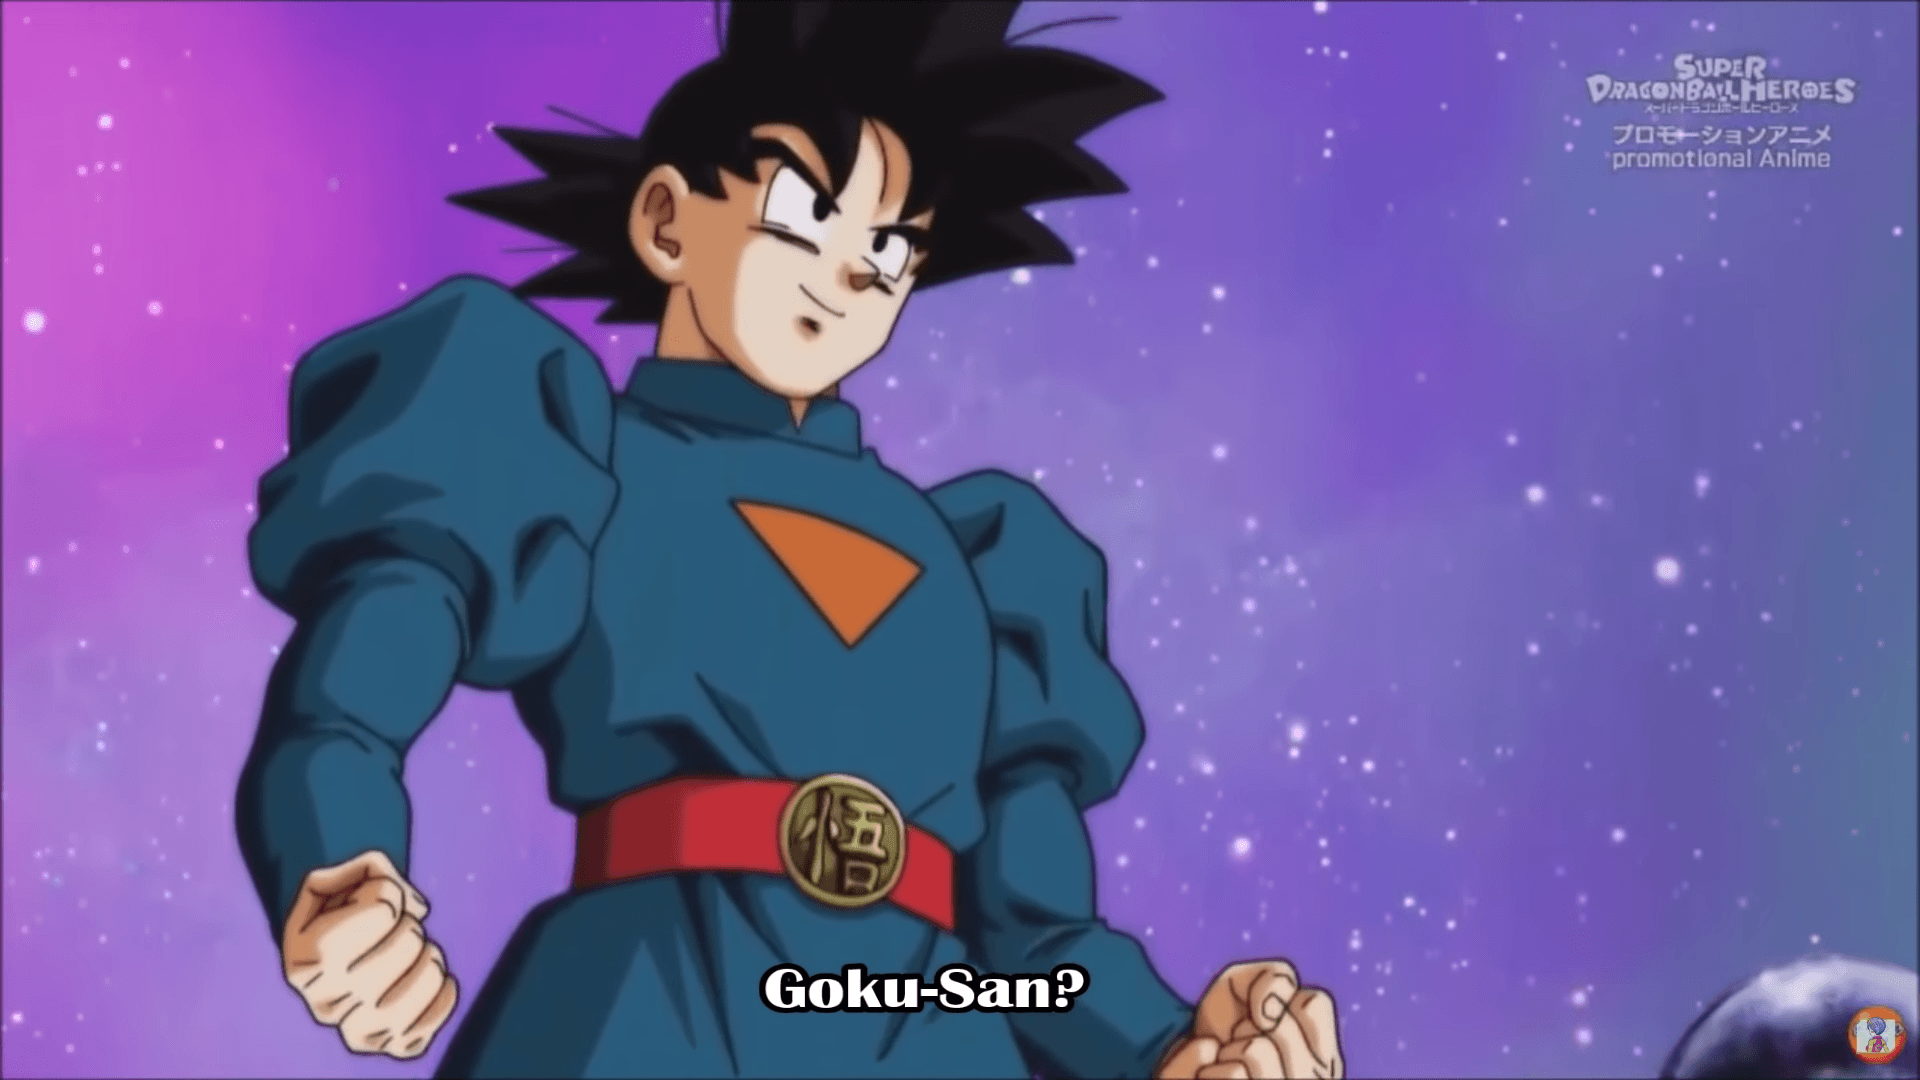 Dragon Ball Heroes Episode 9 will feature Goku Grand Priest